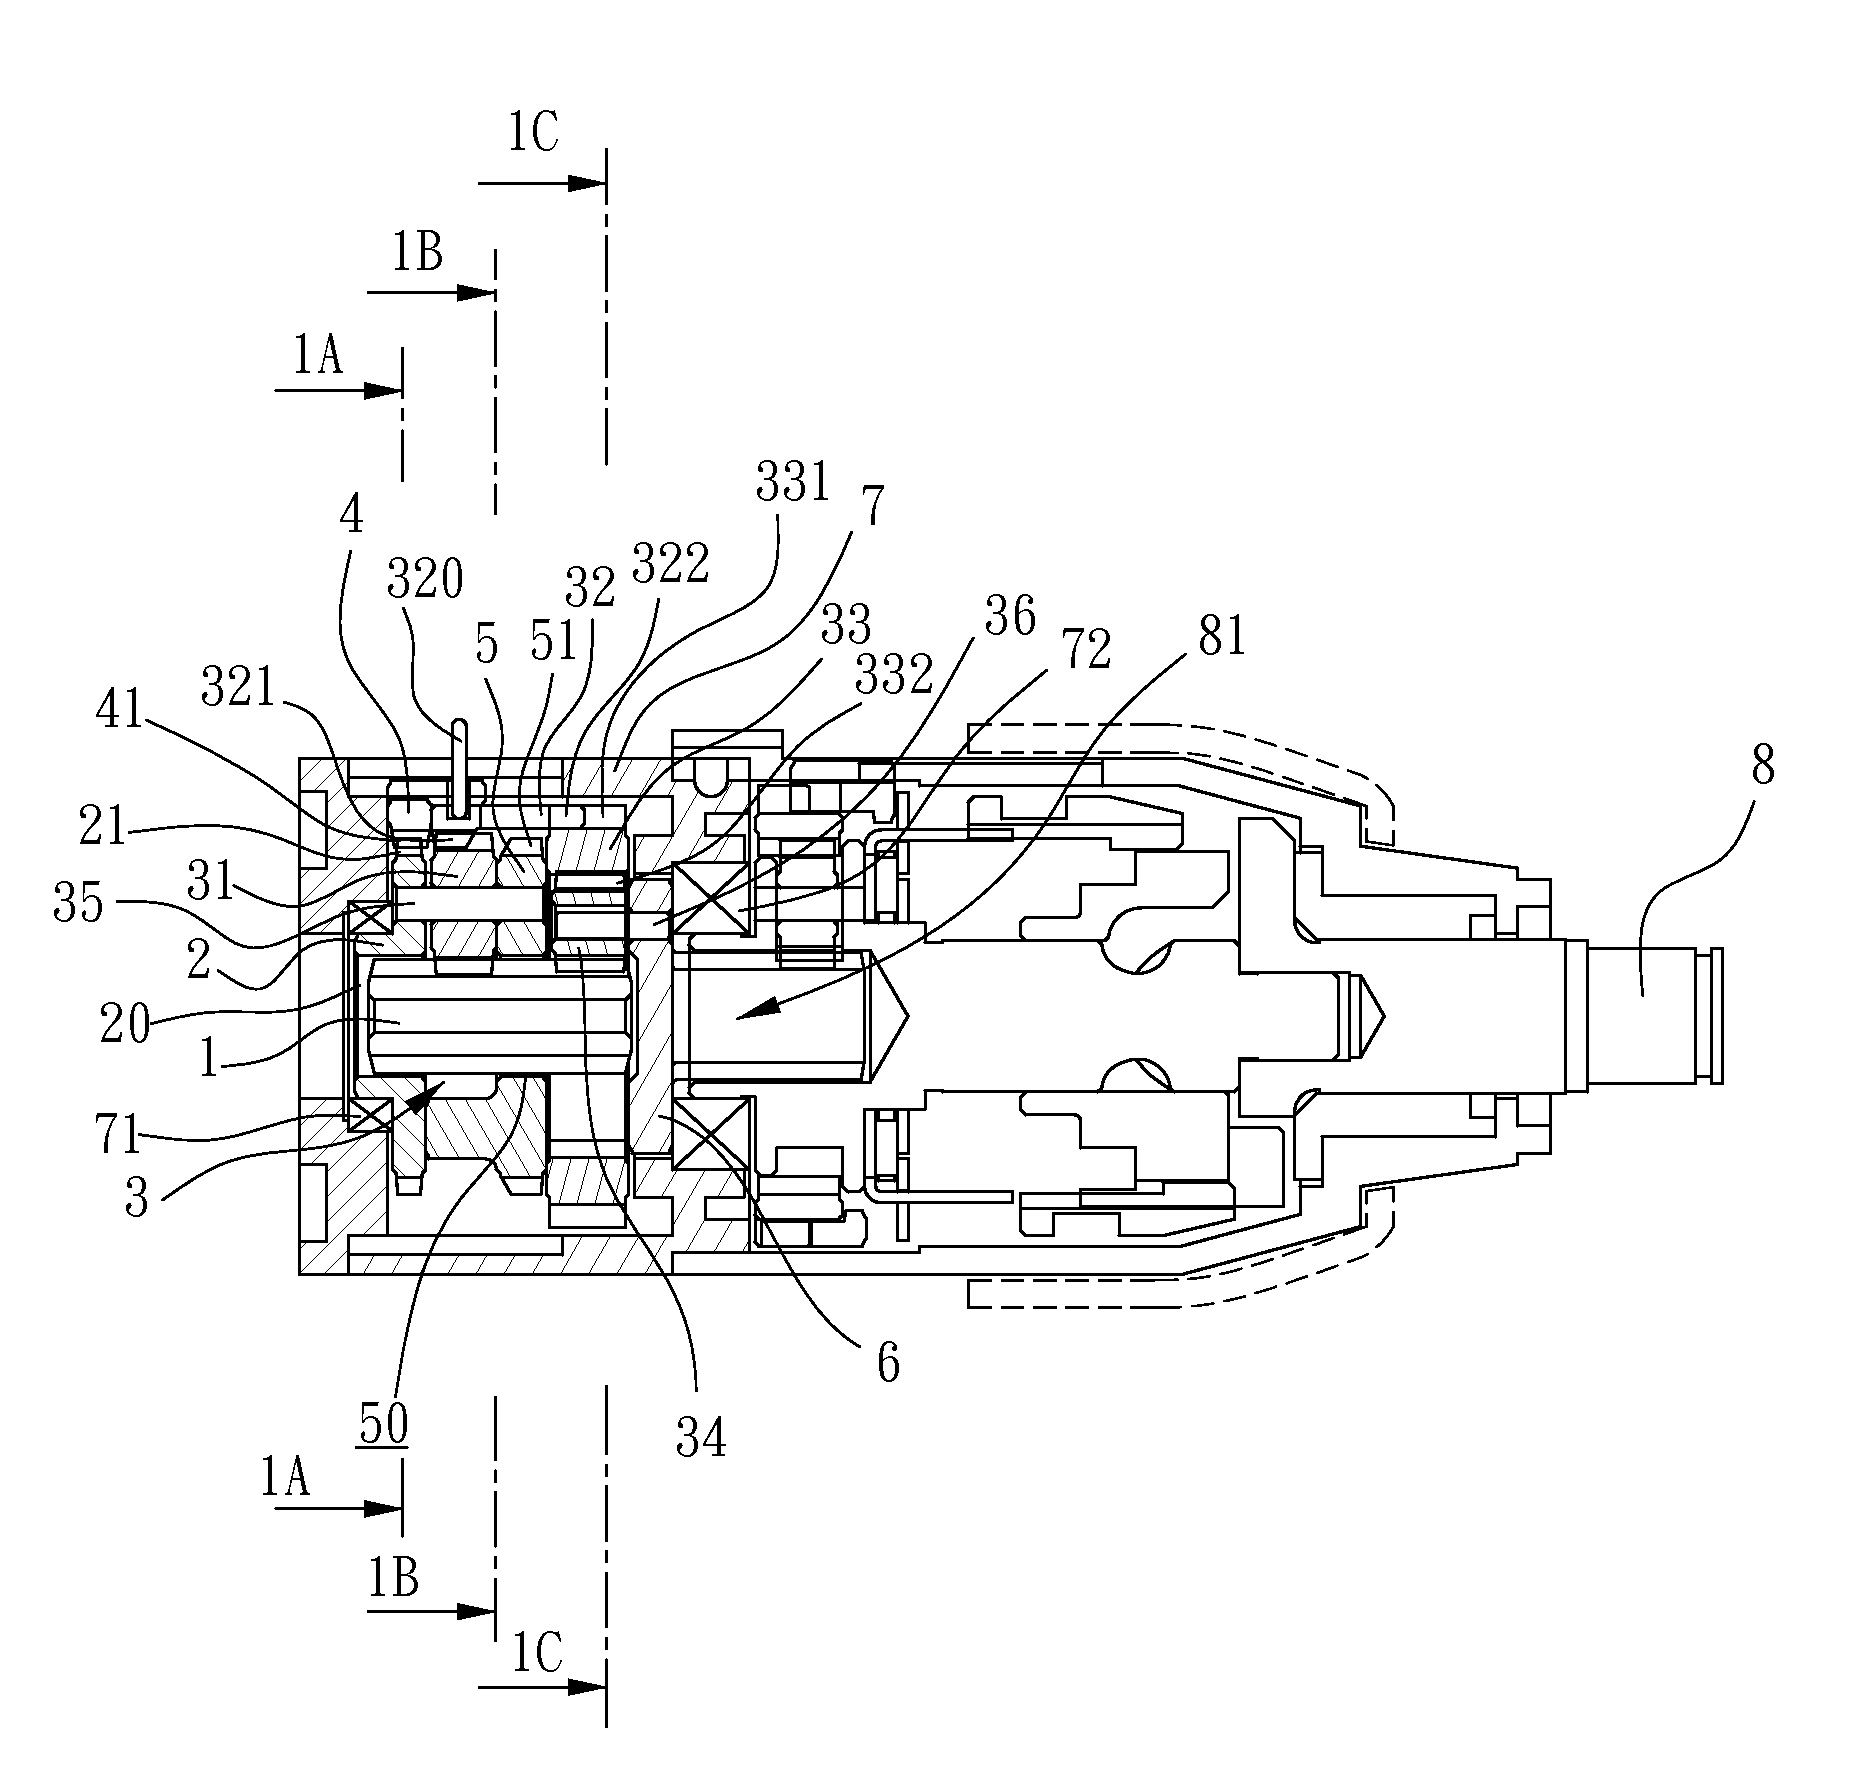 Multi-gear mechanism for power tools